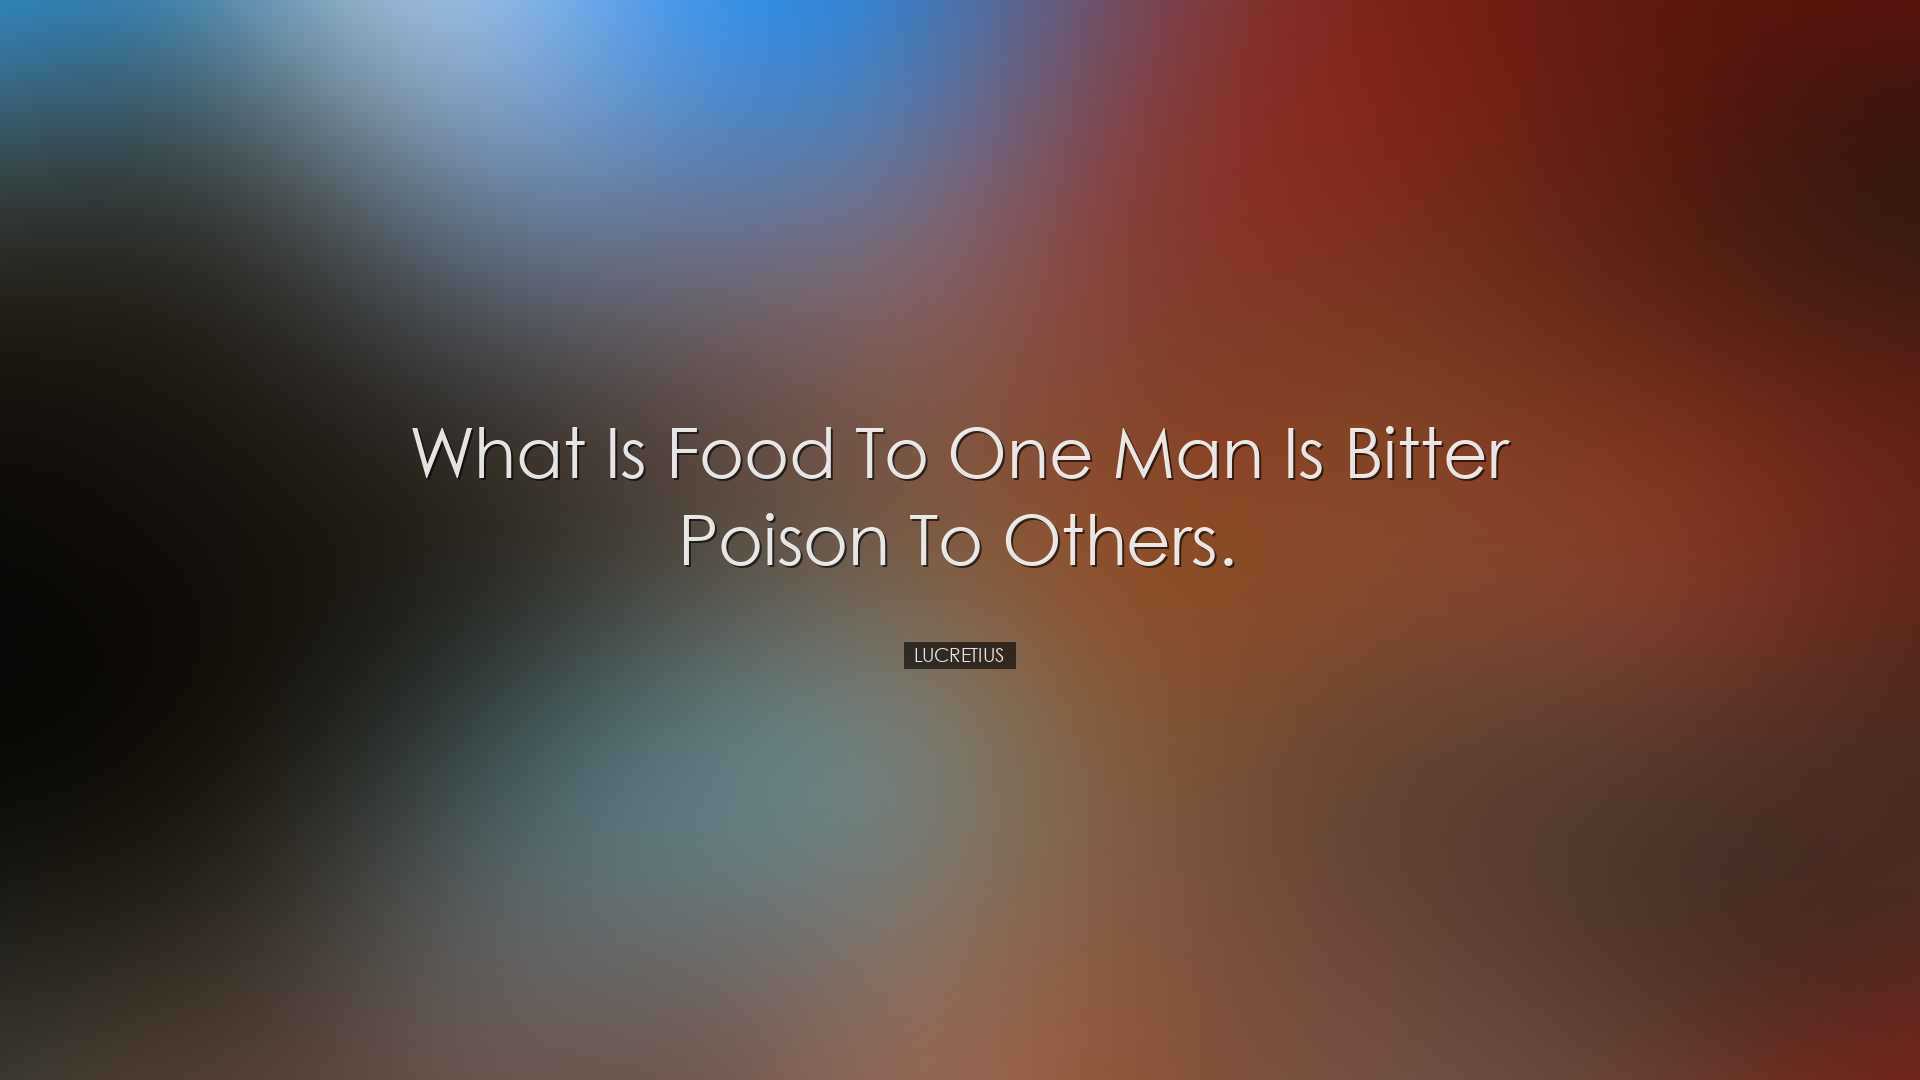 What is food to one man is bitter poison to others. - Lucretius